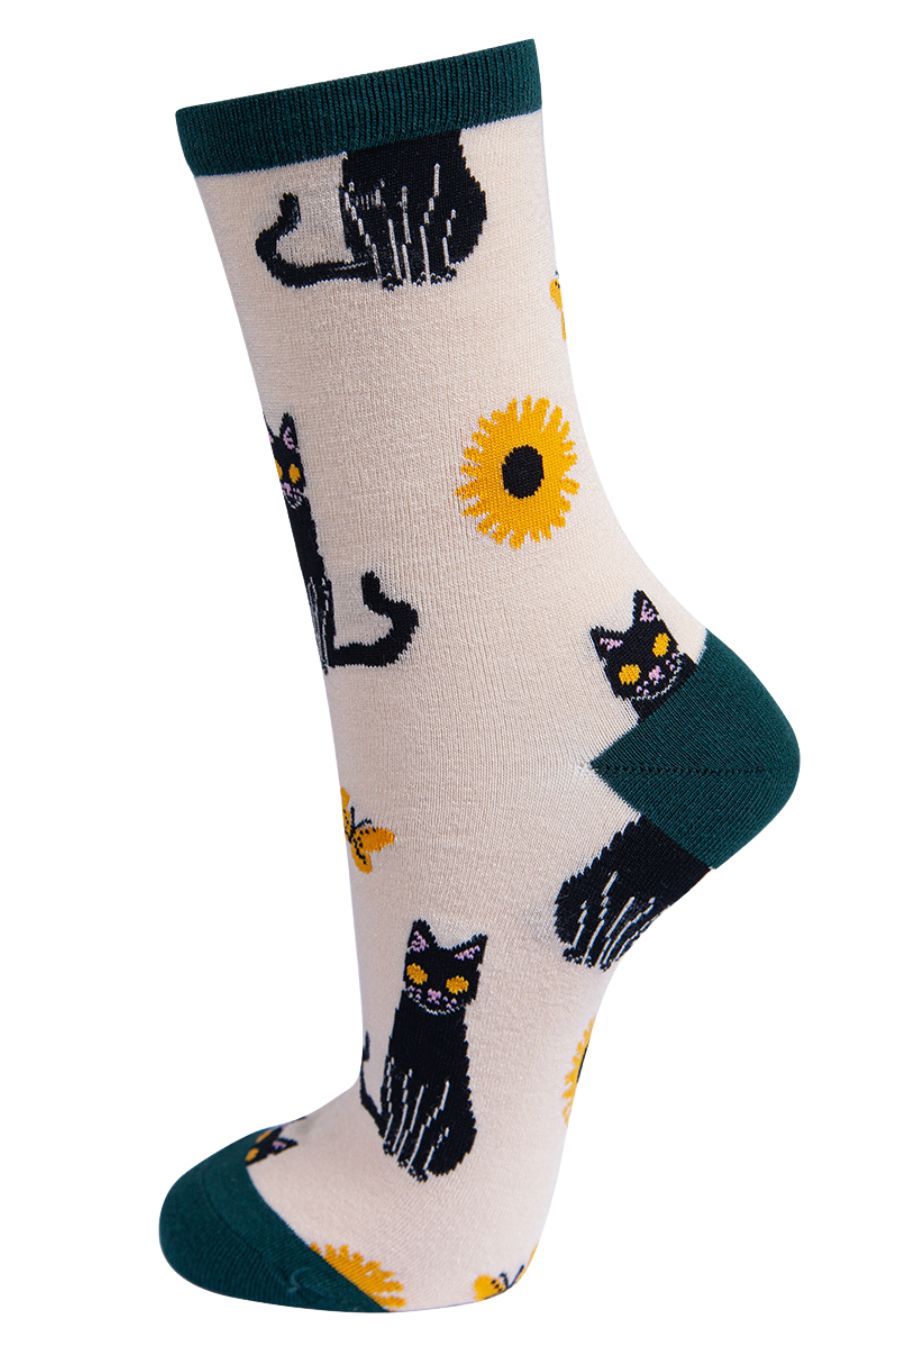 cream ankle socks with black cats and yellow sunflowers